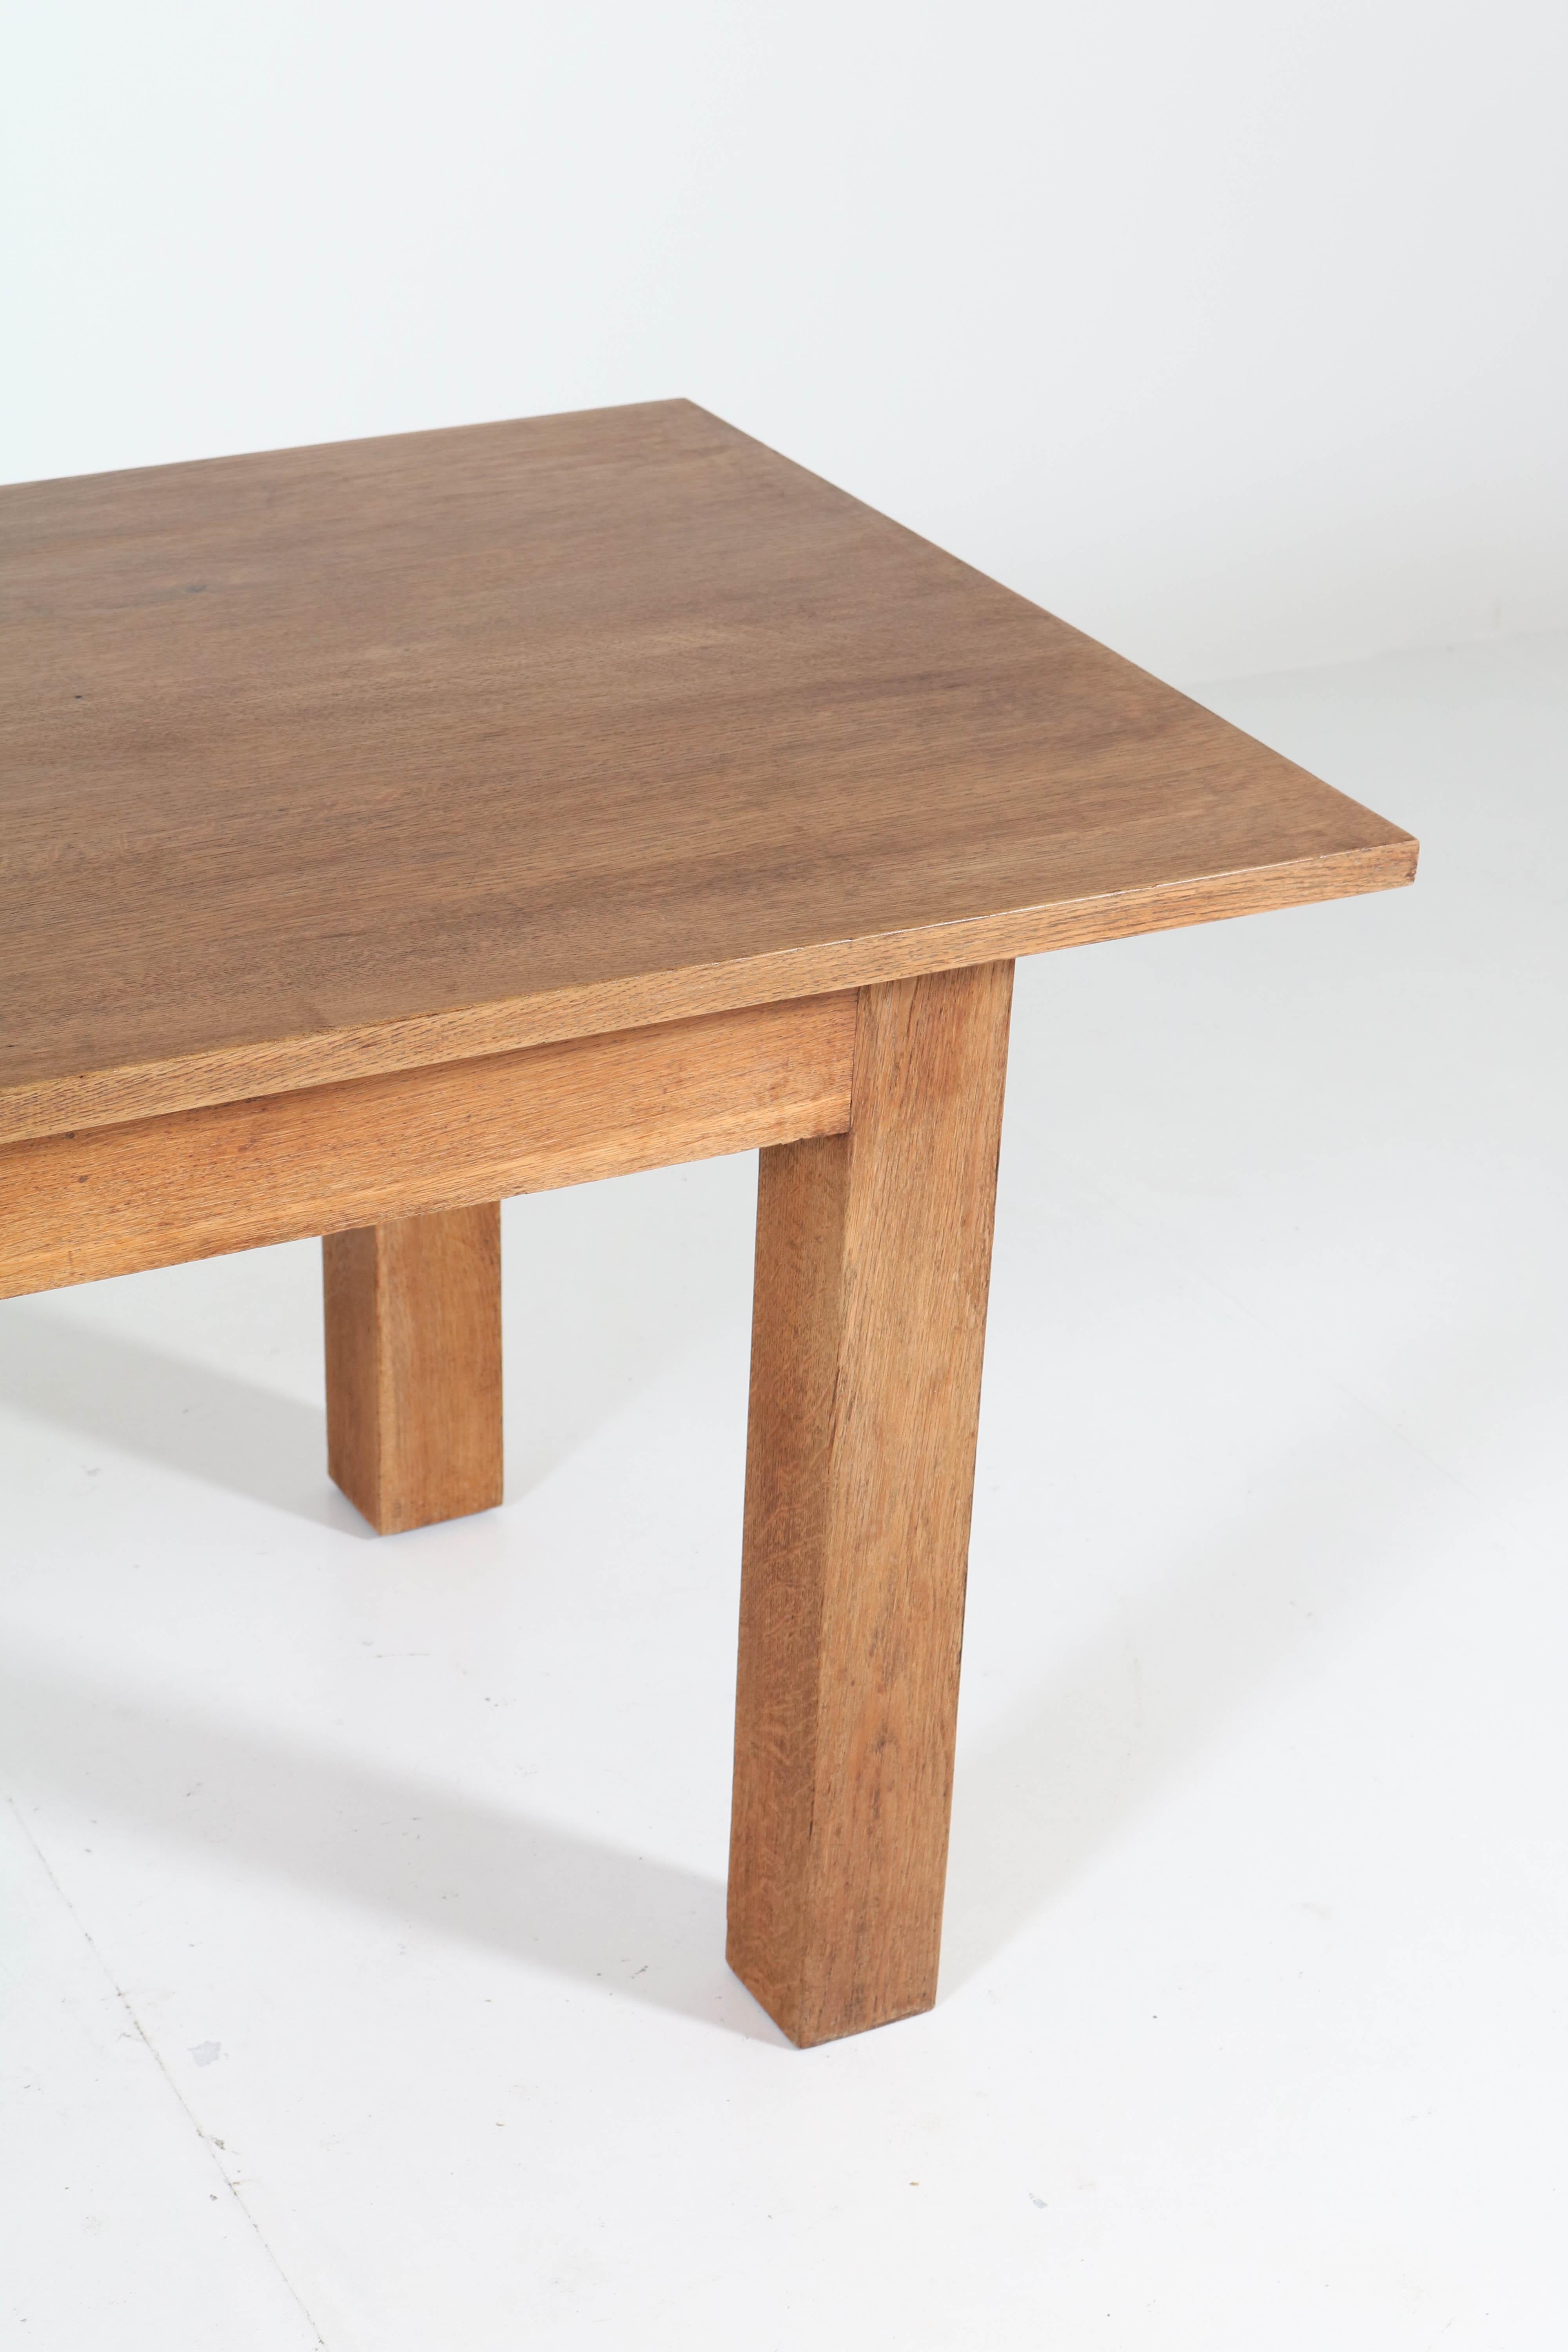 Early 20th Century Oak Art Deco Haagse School Table by Cor Alons, 1923 For Sale